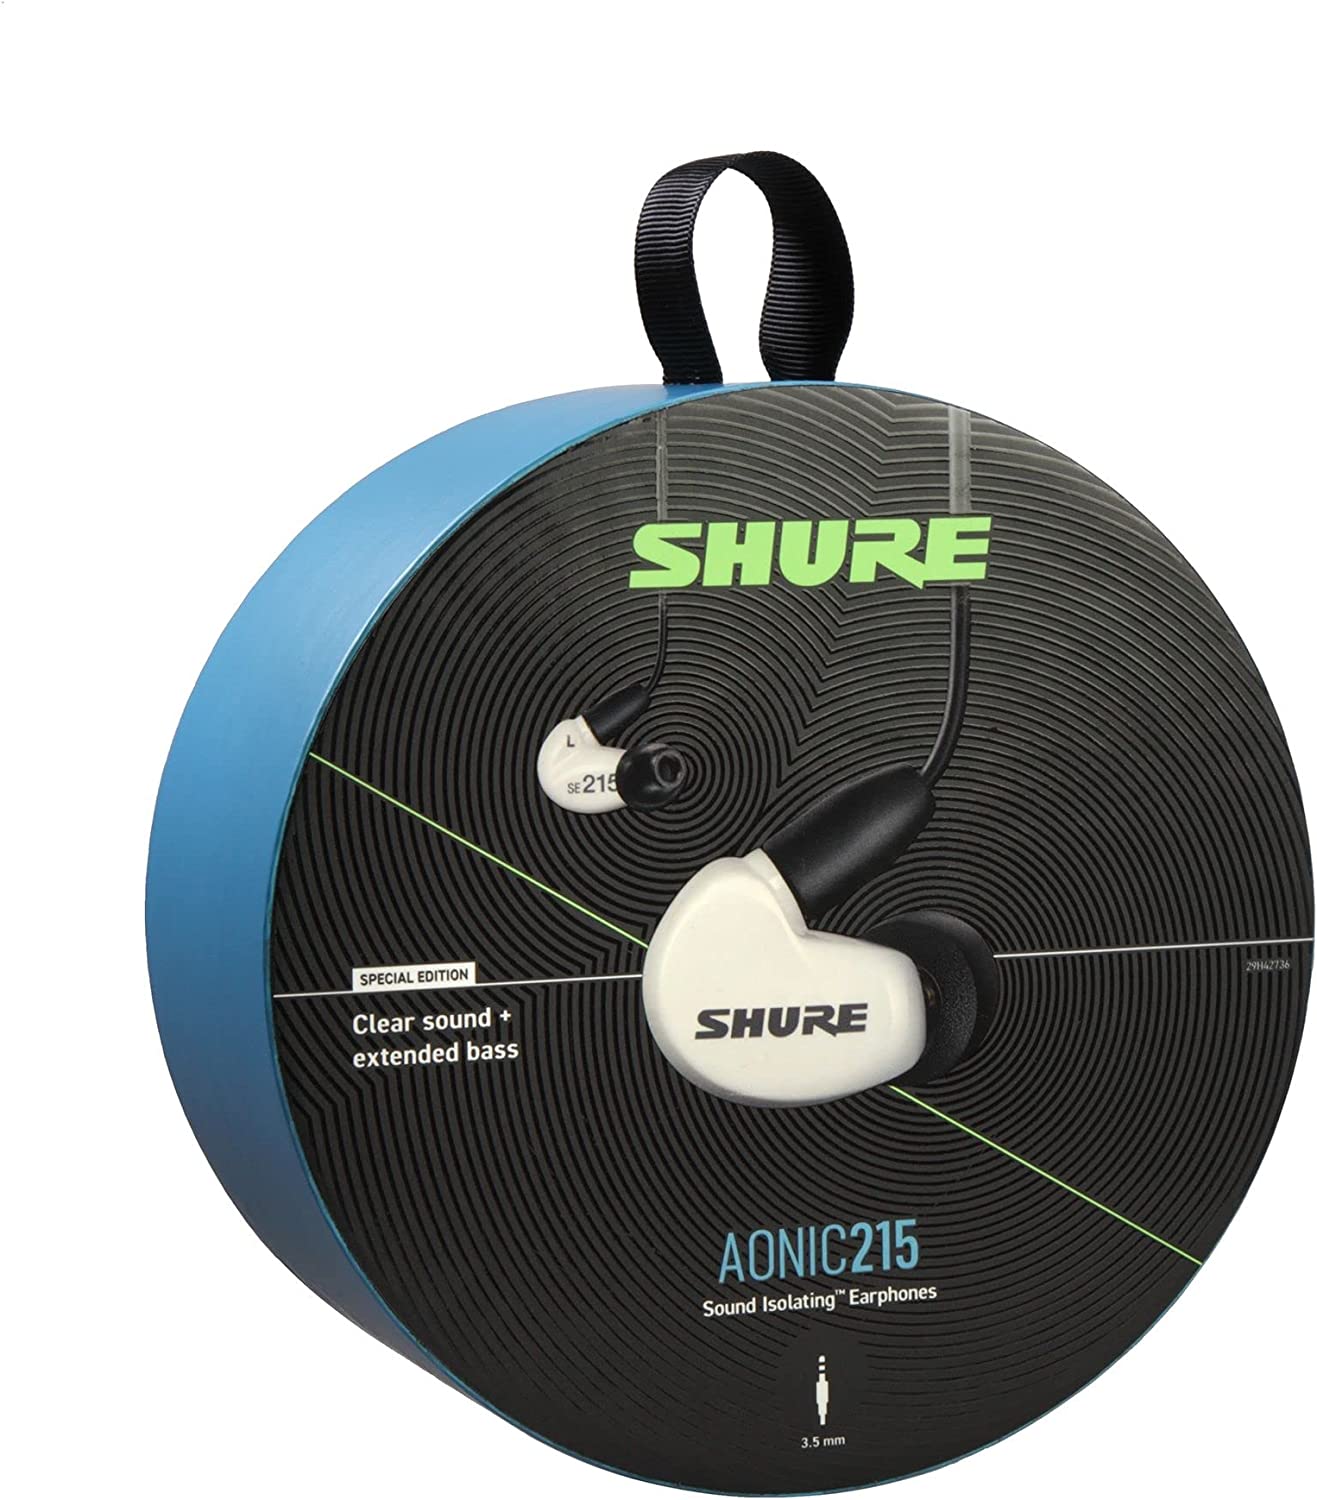 SHURE AONIC 215 SOUND ISOLATING EARPHONES - WHITE